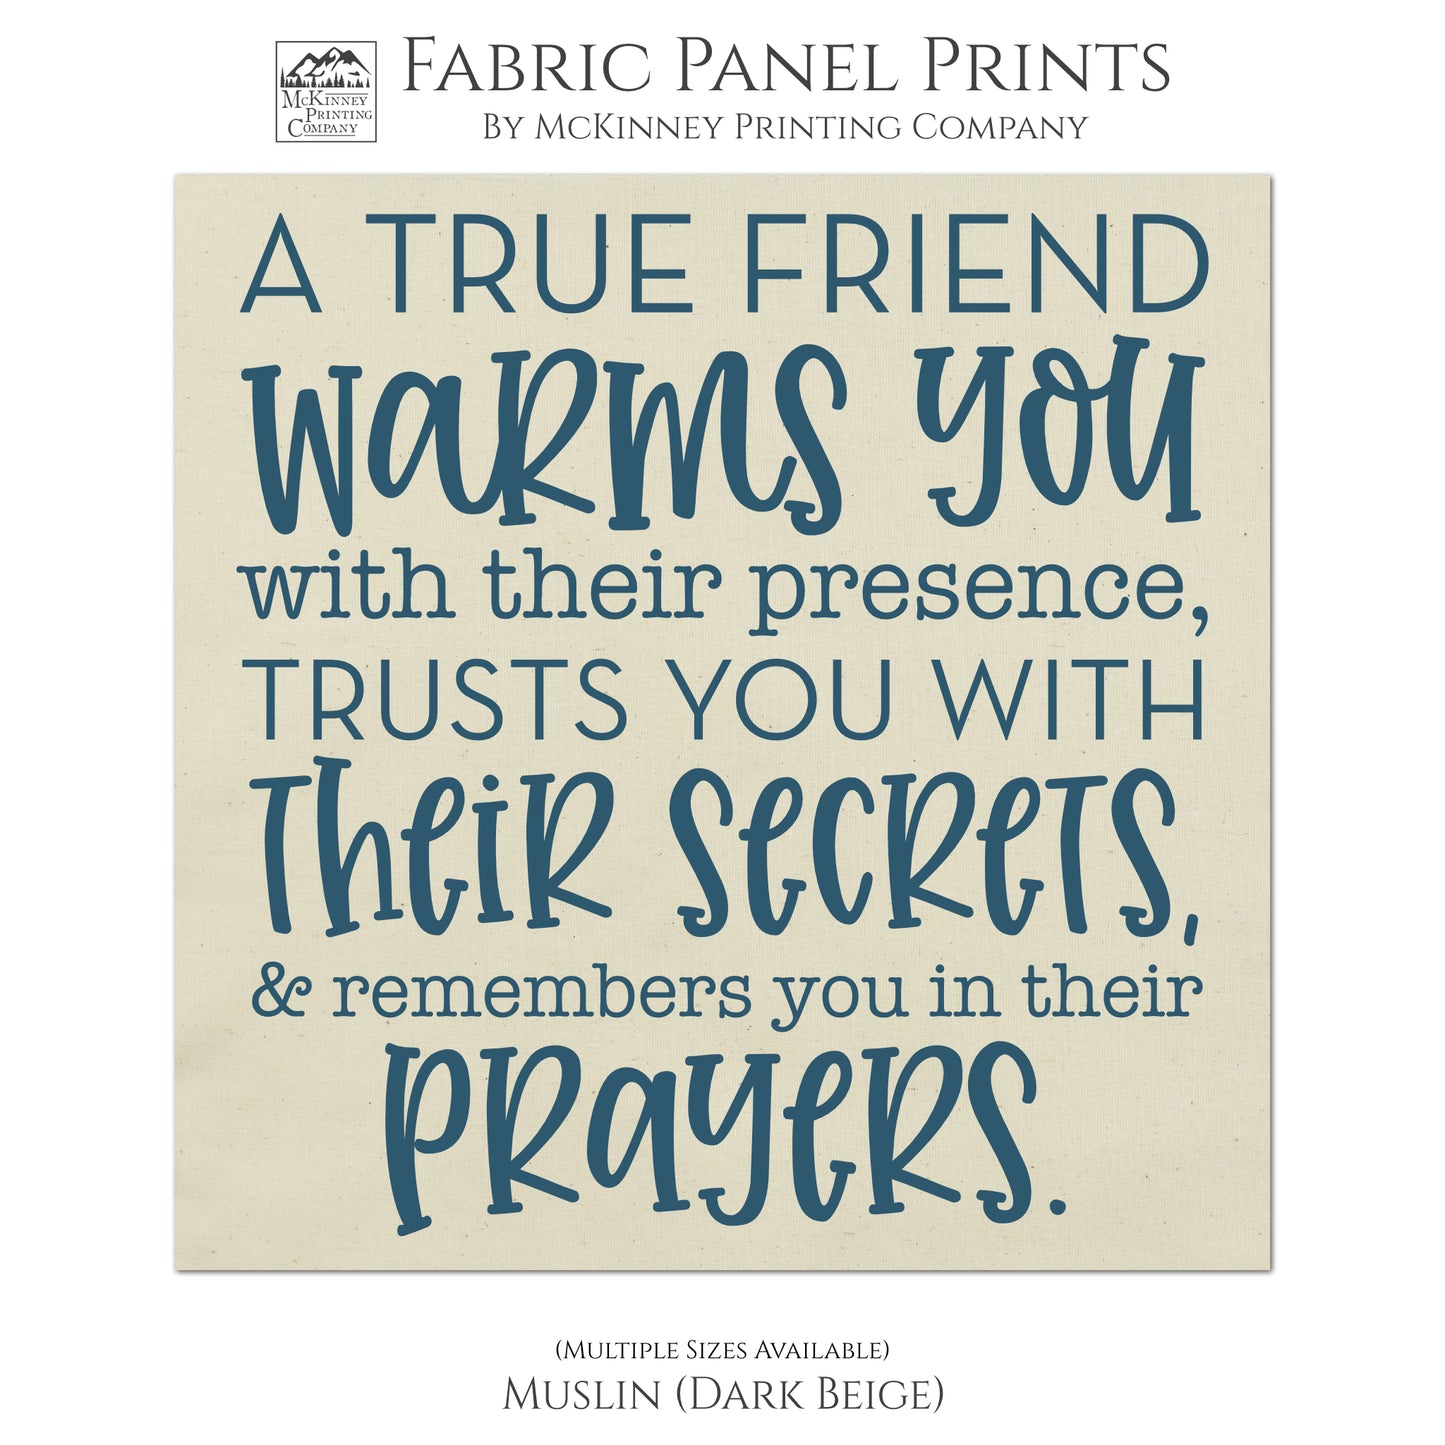 A true friend warms you with their presence, trusts you with their secrets, and remembers you in their prayers - Friendship fabric, Quilt, Craft, Wall Art - Muslin